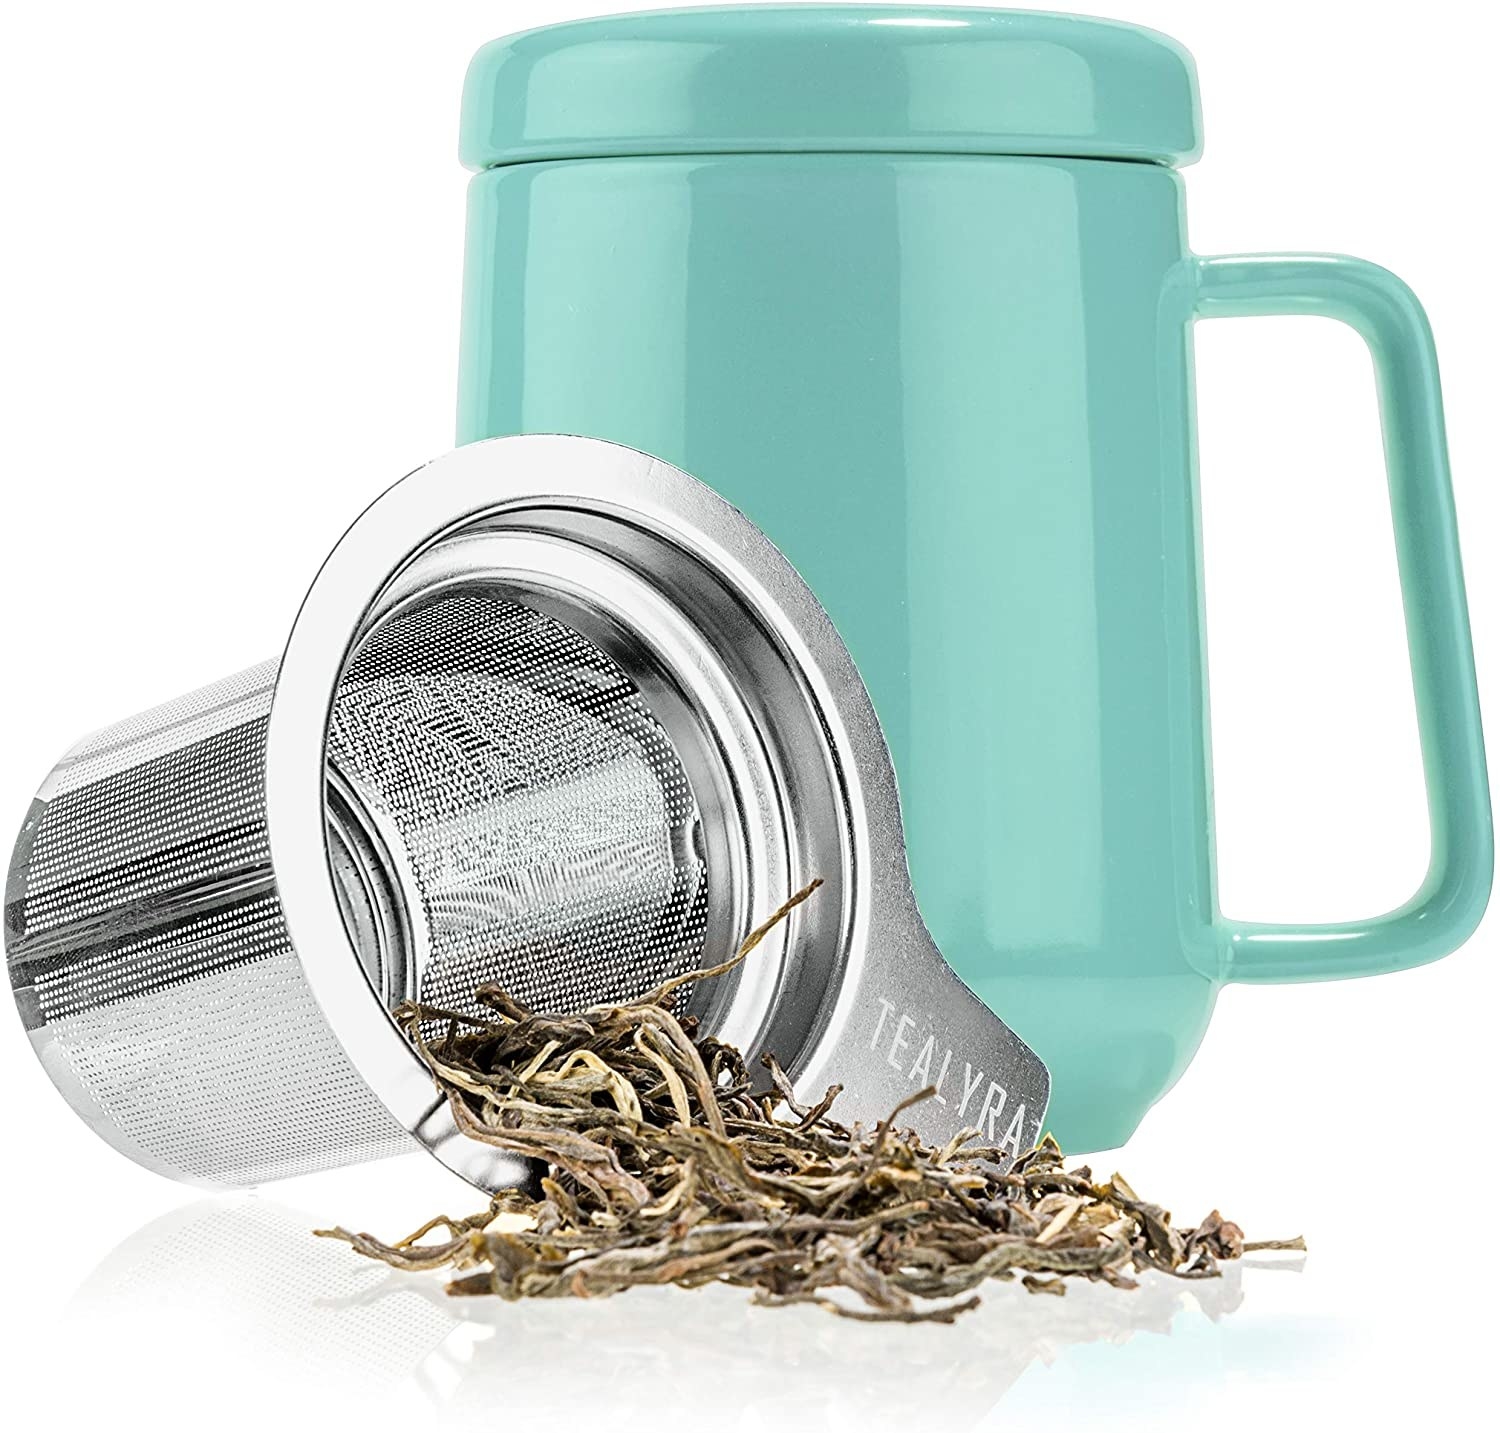 A ceramic mug with a metal infuser next to it